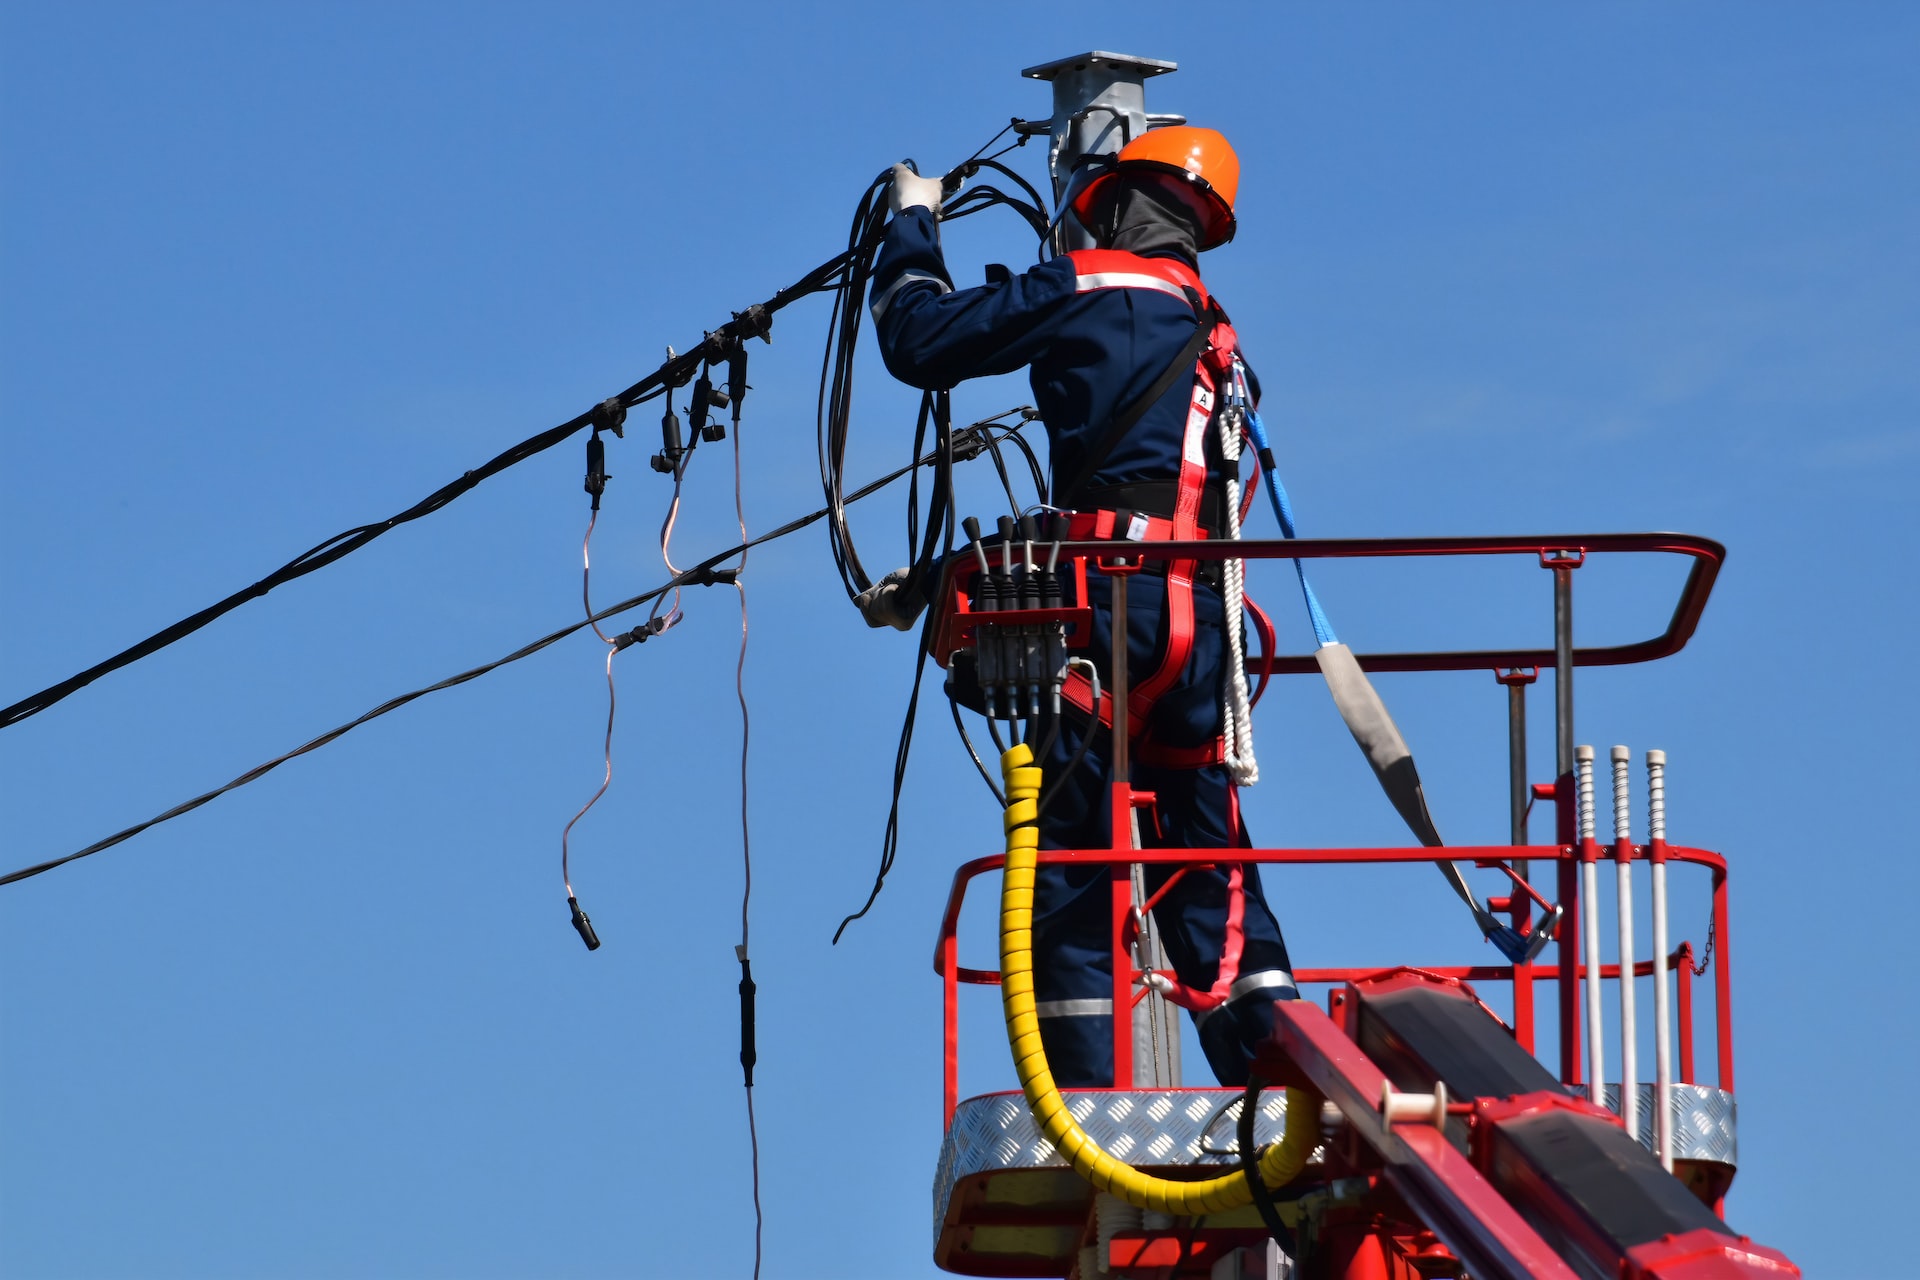 A worker adjusts overhead power cables that supply energy around the UK